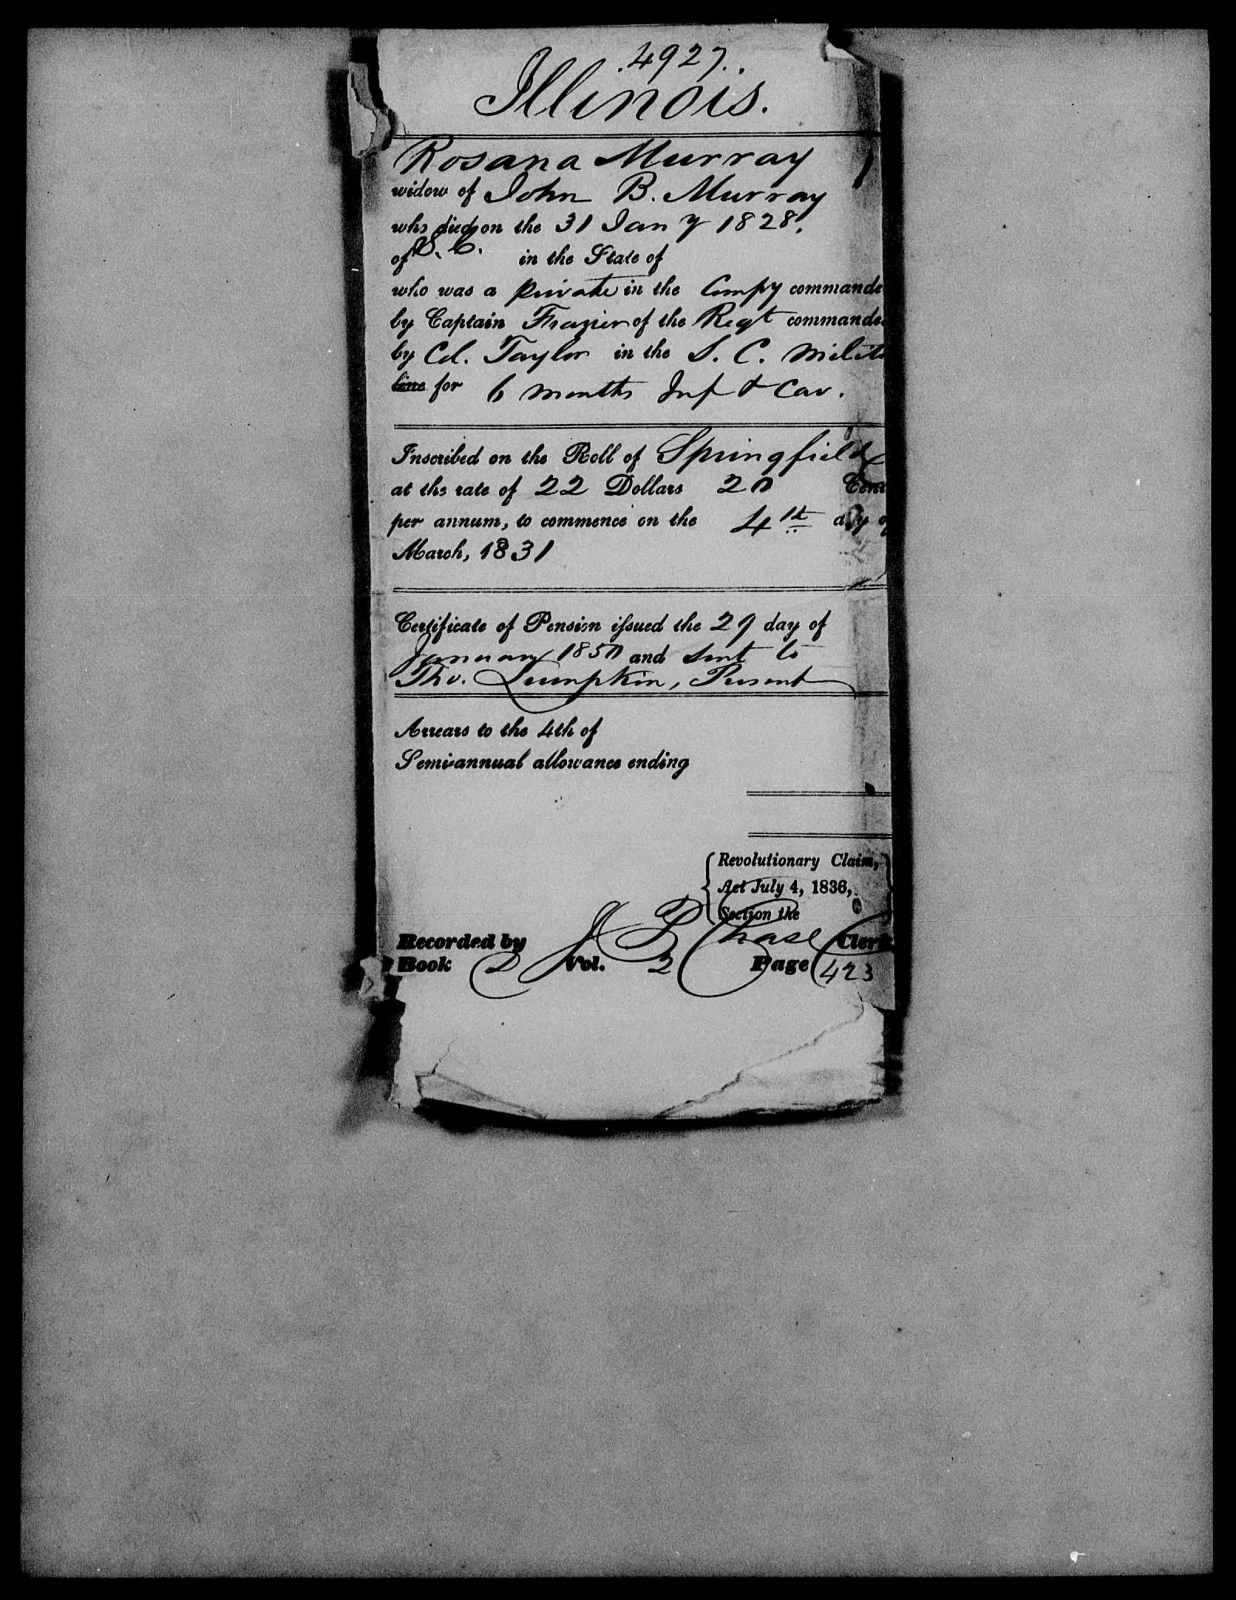 Docket for Widow's Pension from the U.S. Pension Office for Rosana Murray, 29 January 1850